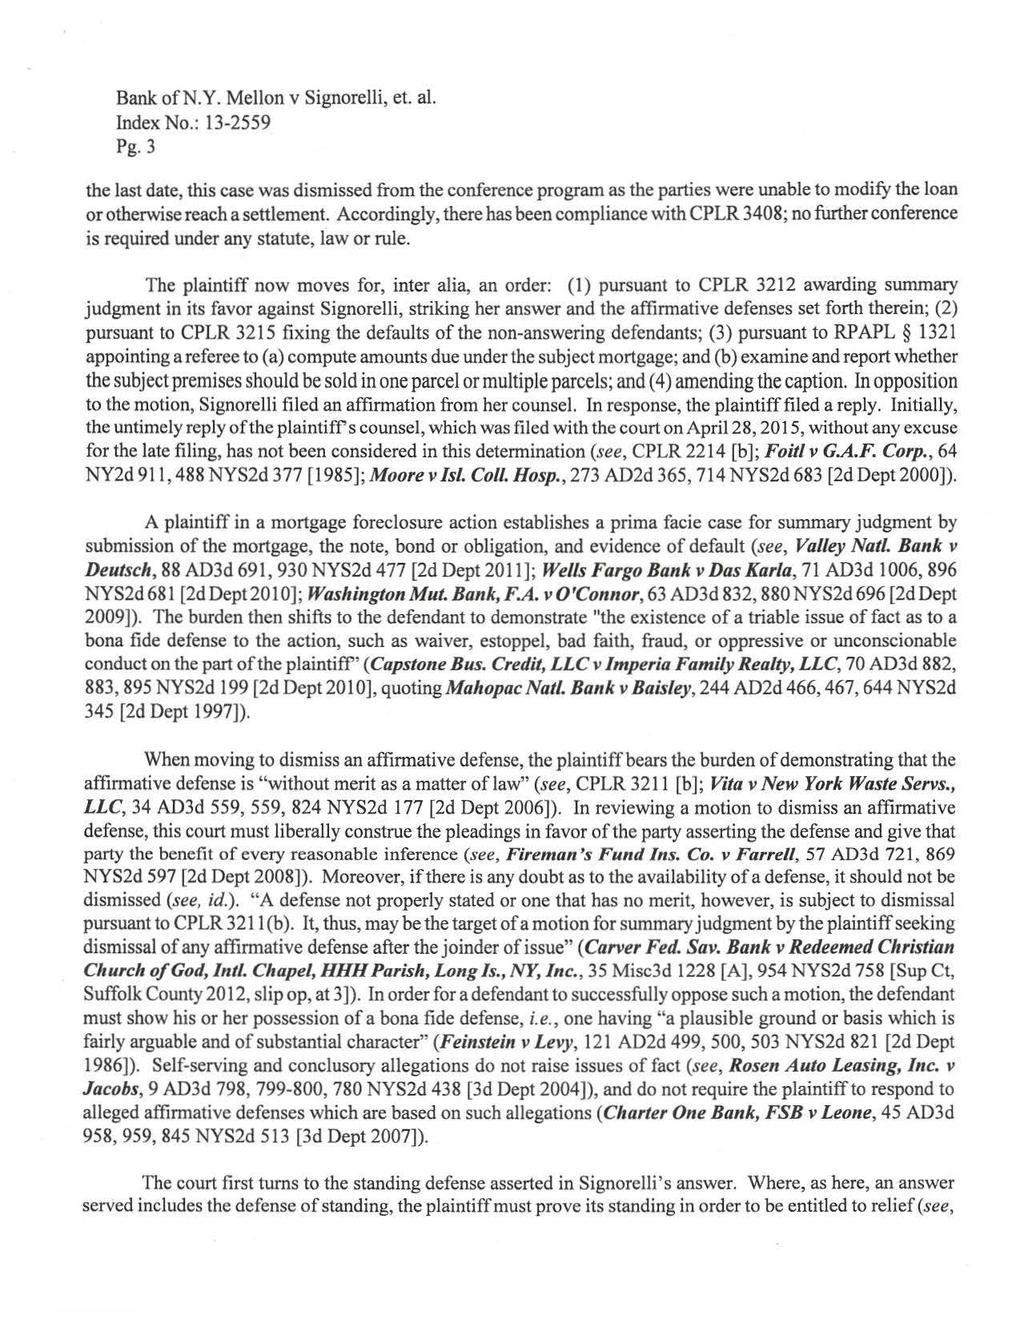 [* 3] Pg. 3 the last date, this case was dismissed from the conference program as the parties were unable to modify the loan or otherwise reach a settlement.